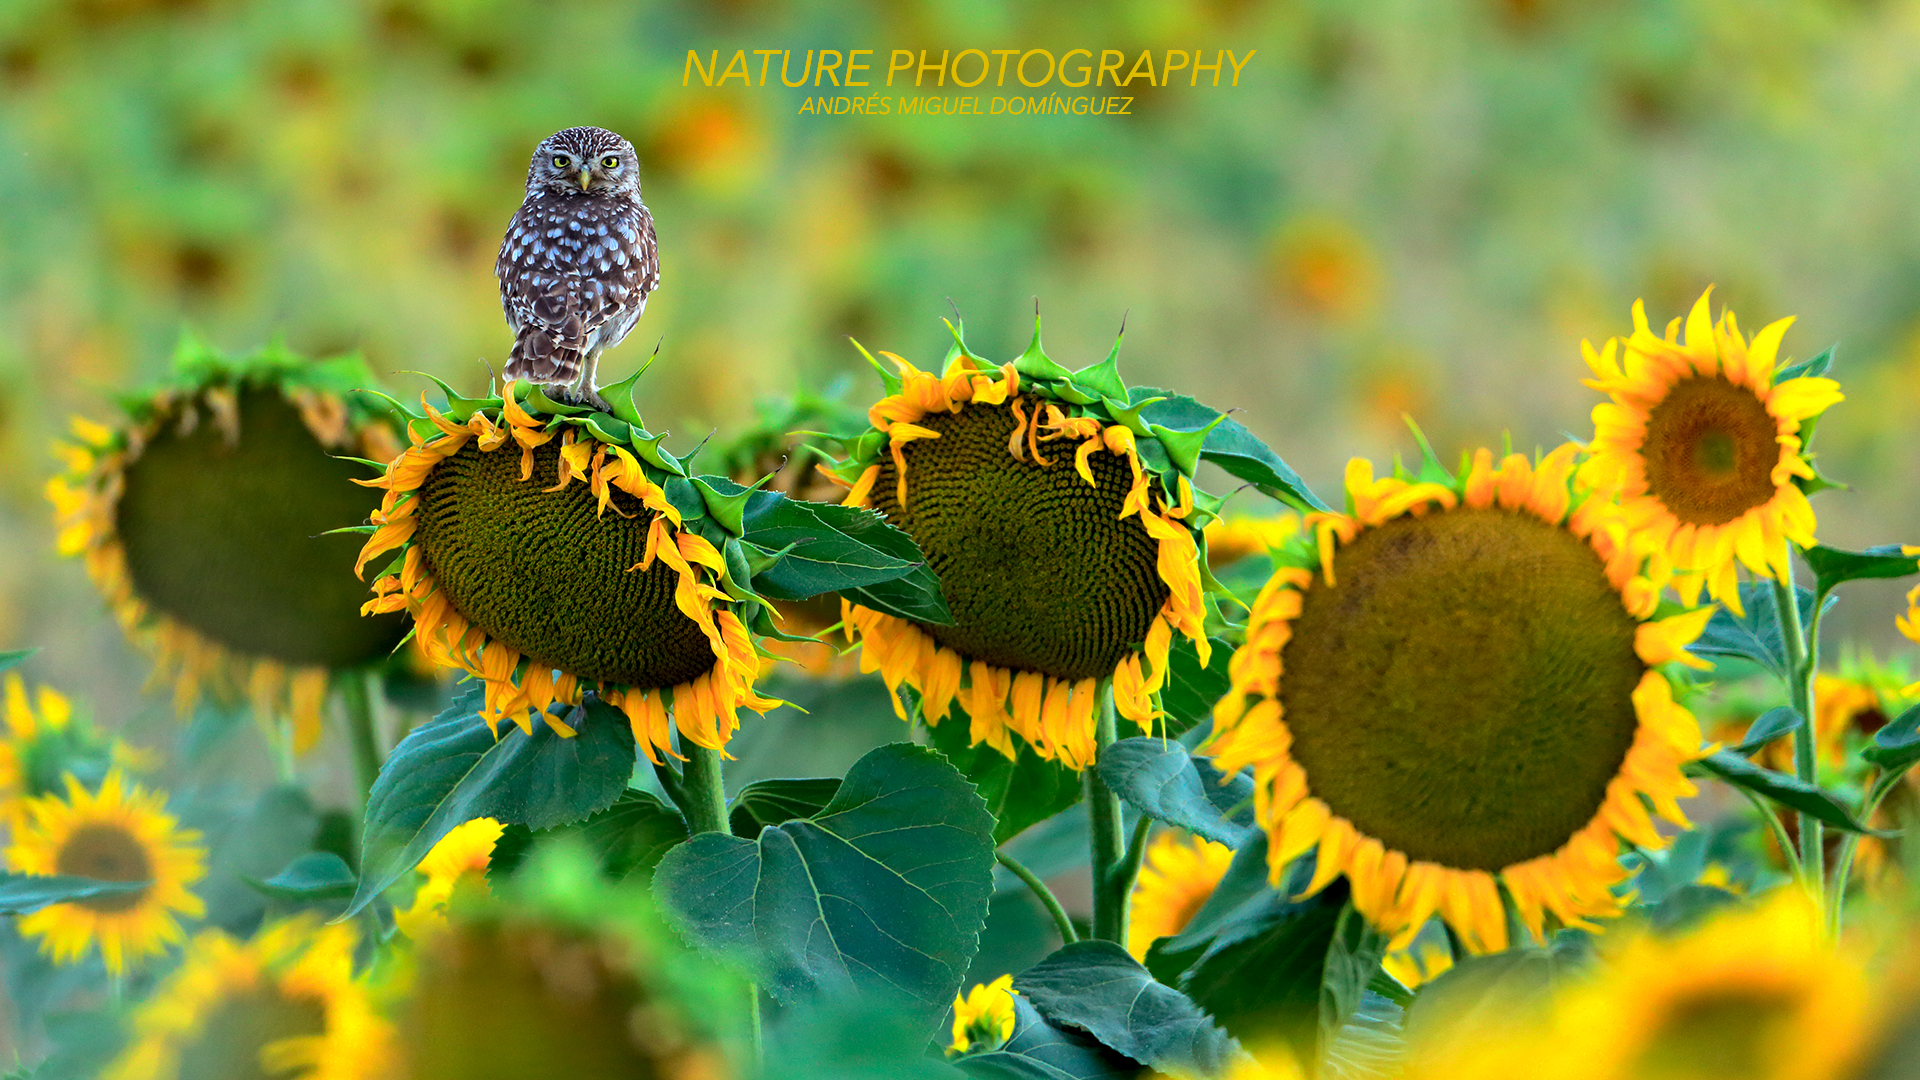 NATURE AND WILDLIFE PHOTOGRAPHY